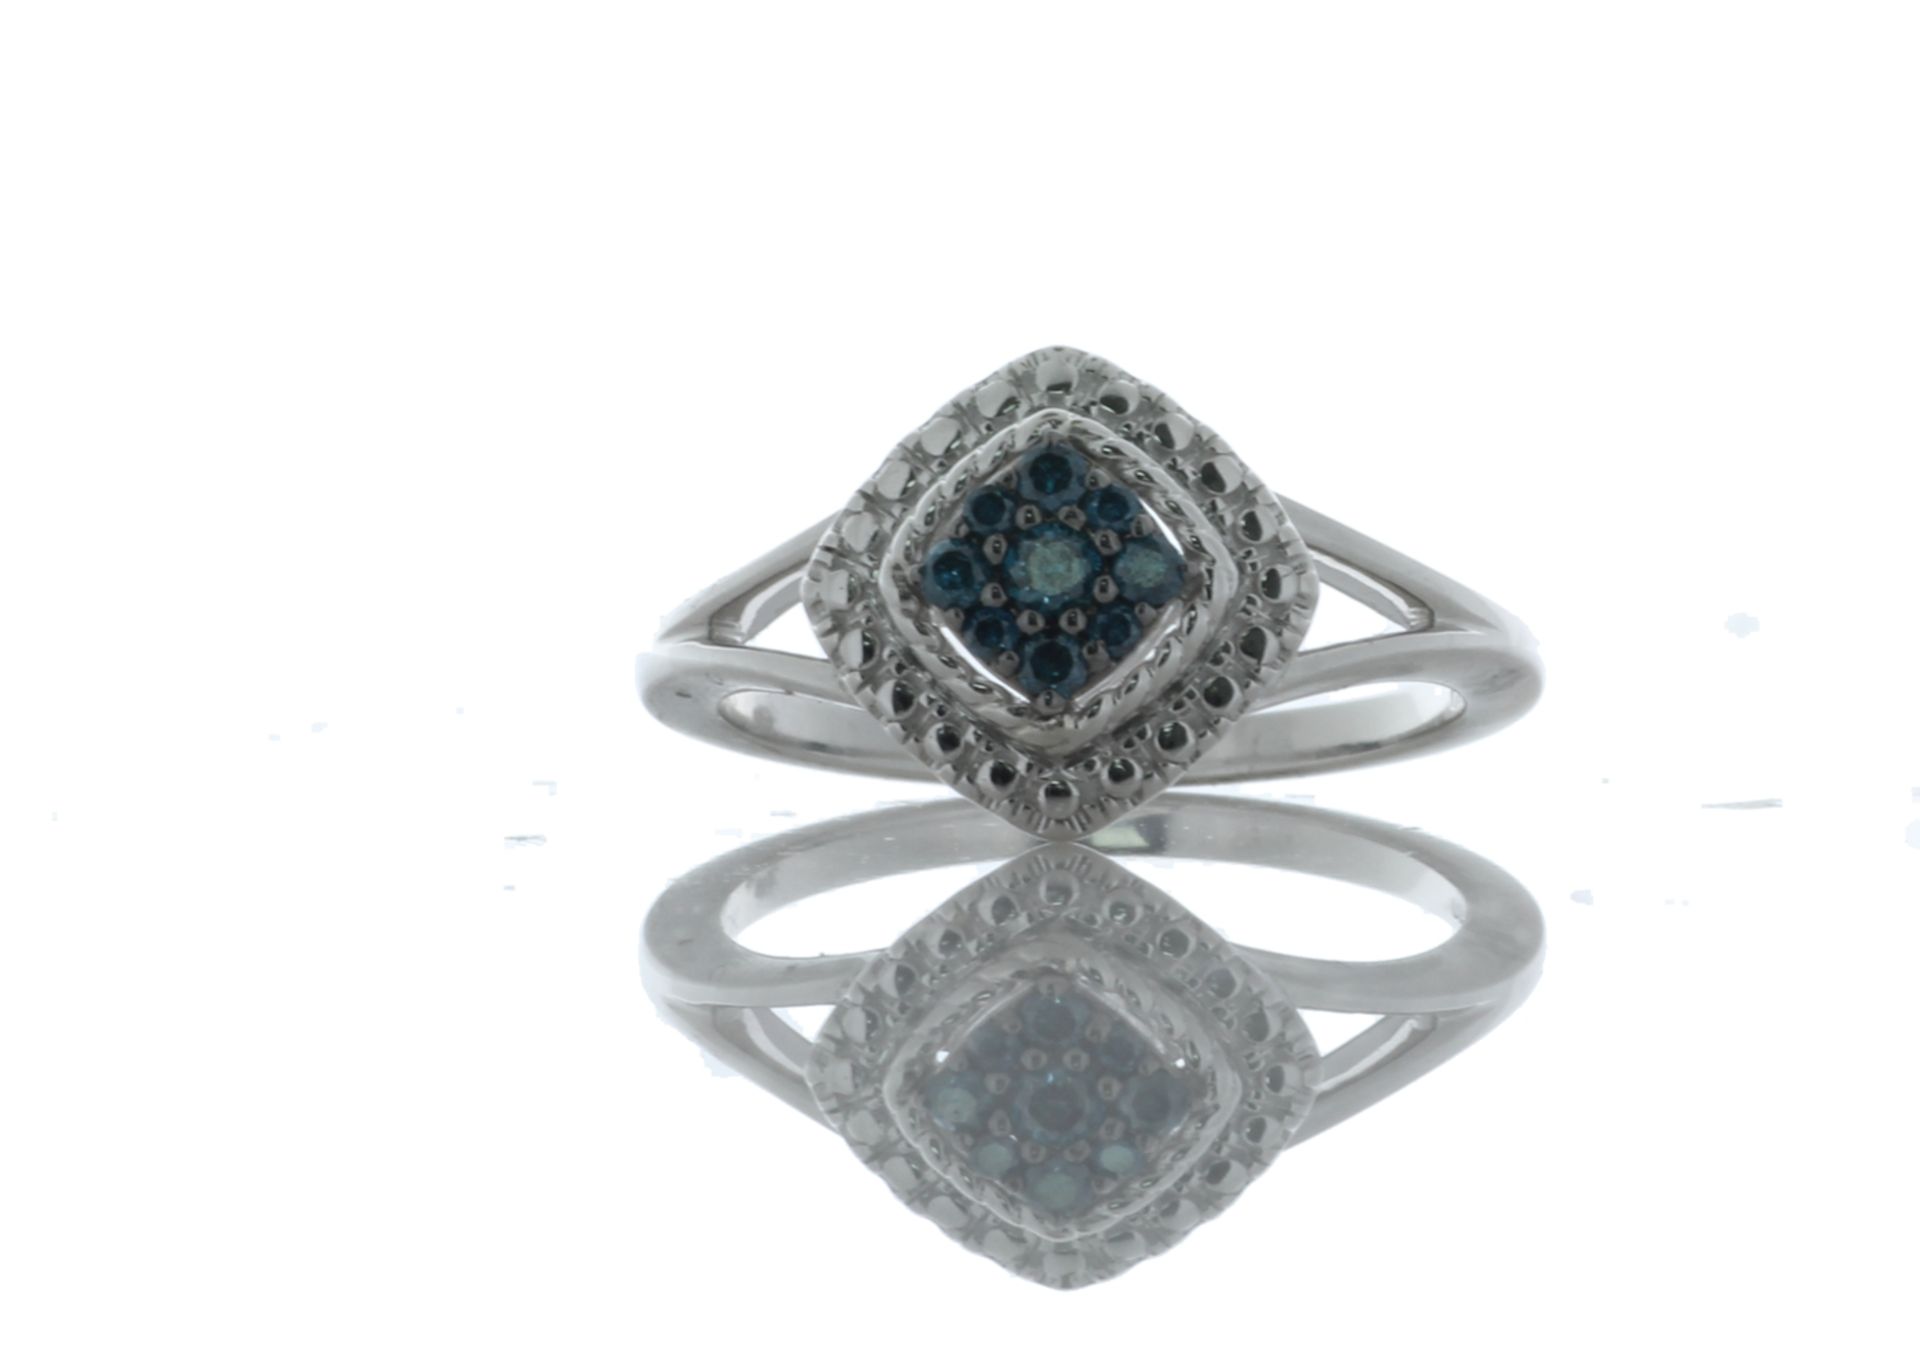 9ct White Gold Diamond Ring 0.15 Carats - Valued by GIE £1,655.00 - 9ct White Gold Diamond Ring 0.15